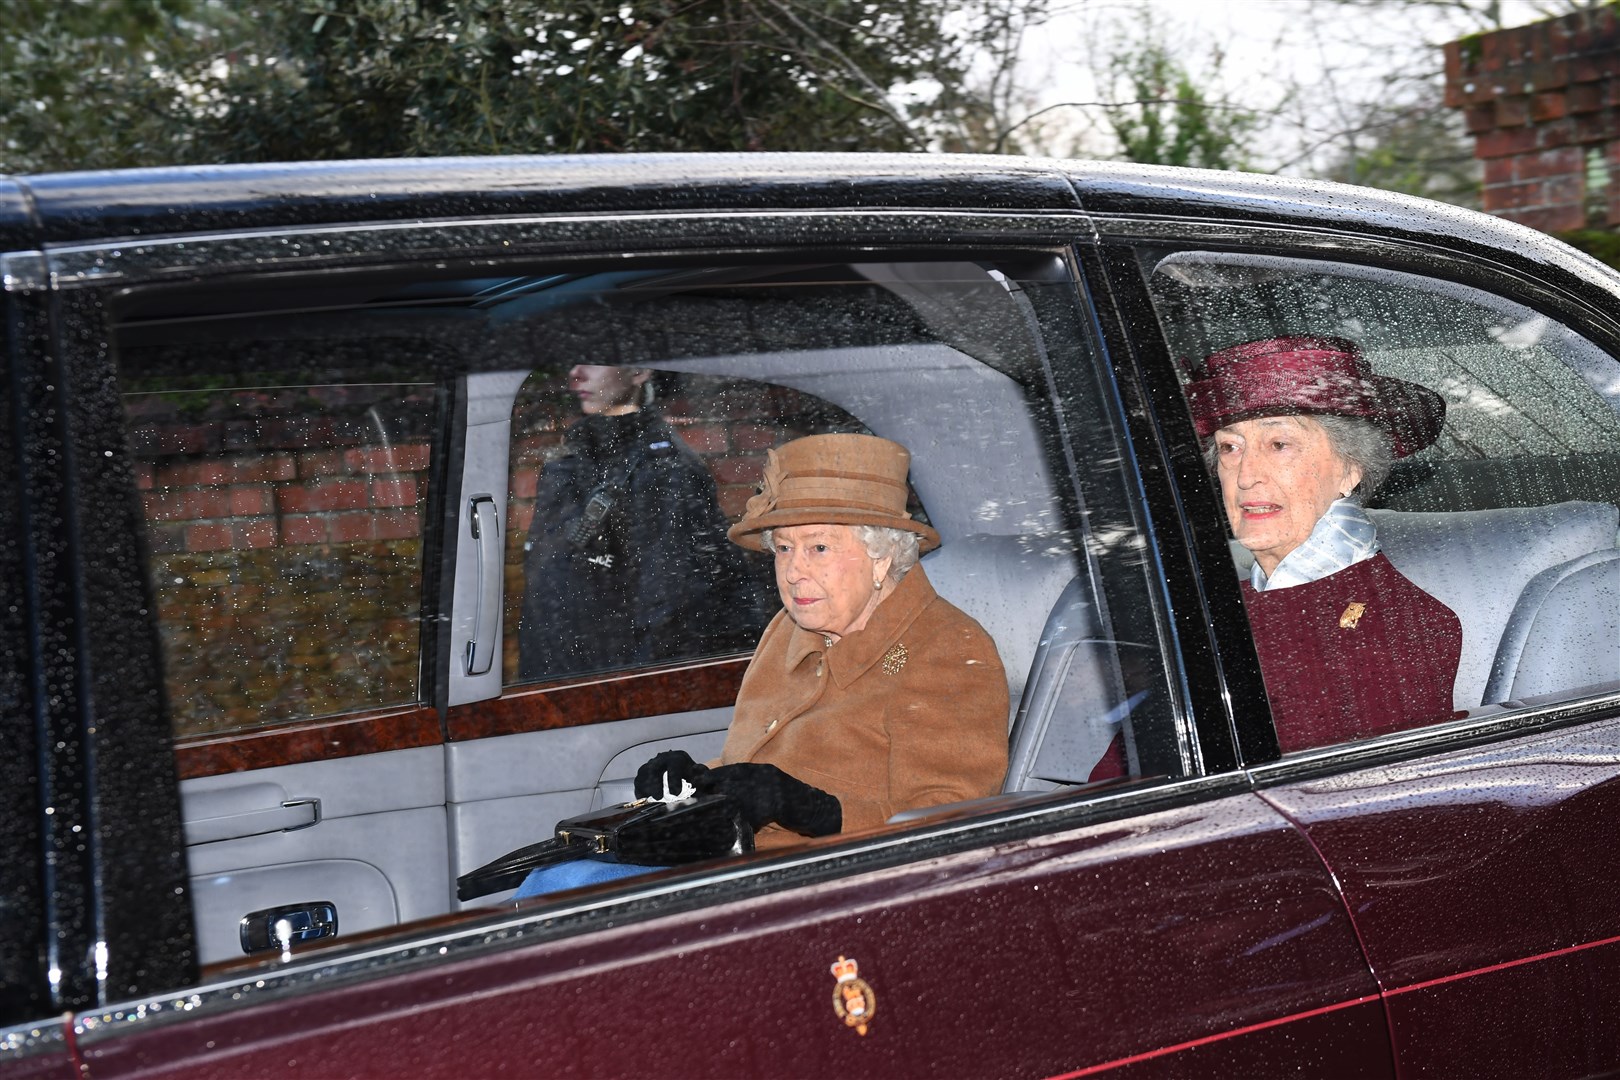 The Queen leaving a morning church service at Sandringham with her senior lady-in-waiting Lady Susan Hussey in 2020 (Joe Giddens/PA)